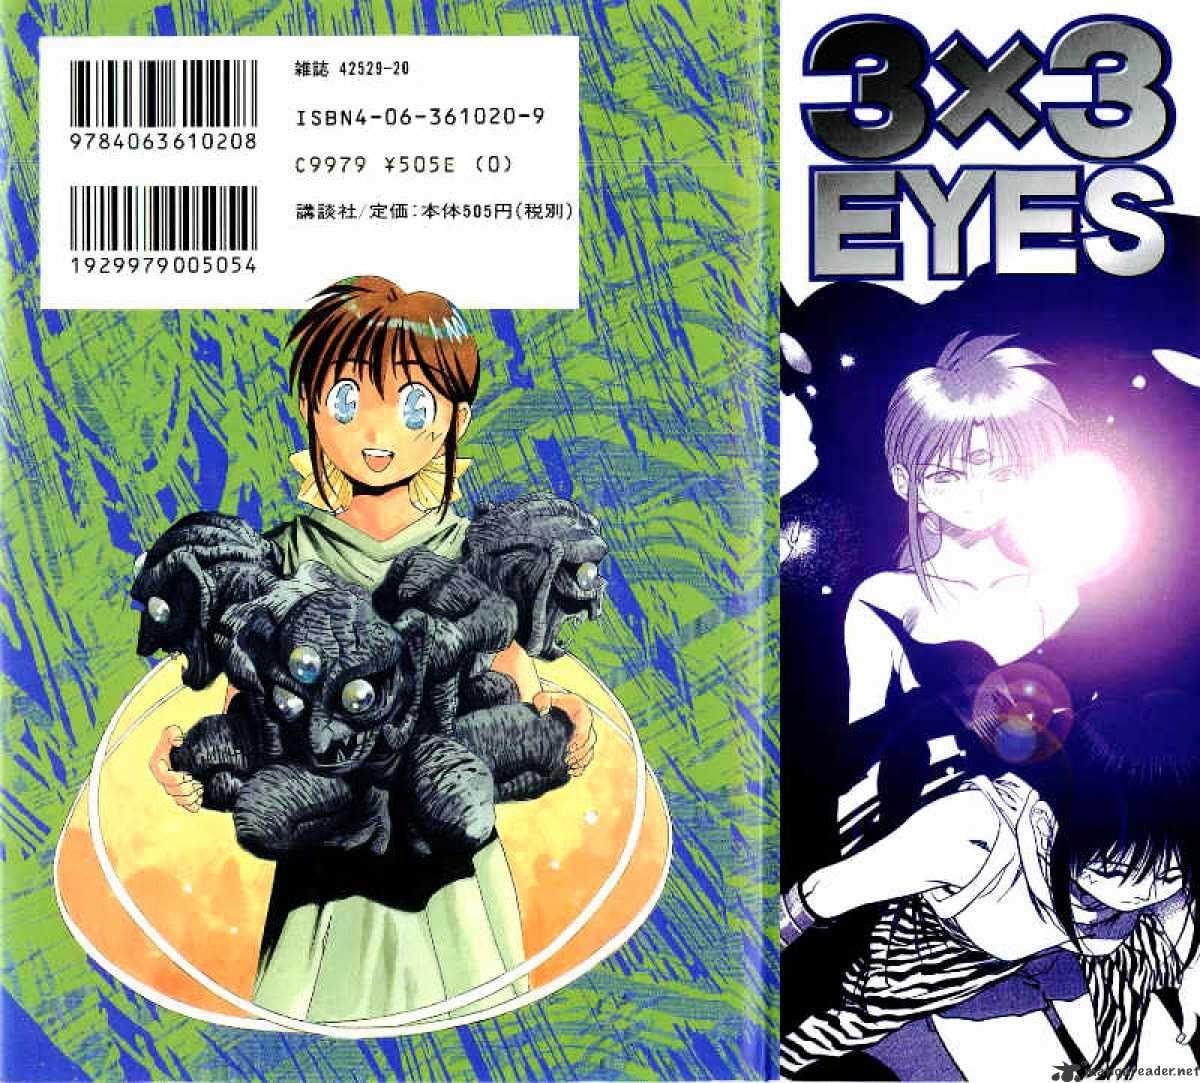 3X3 Eyes Chapter 539 : V.38 C.2 - Picture 2